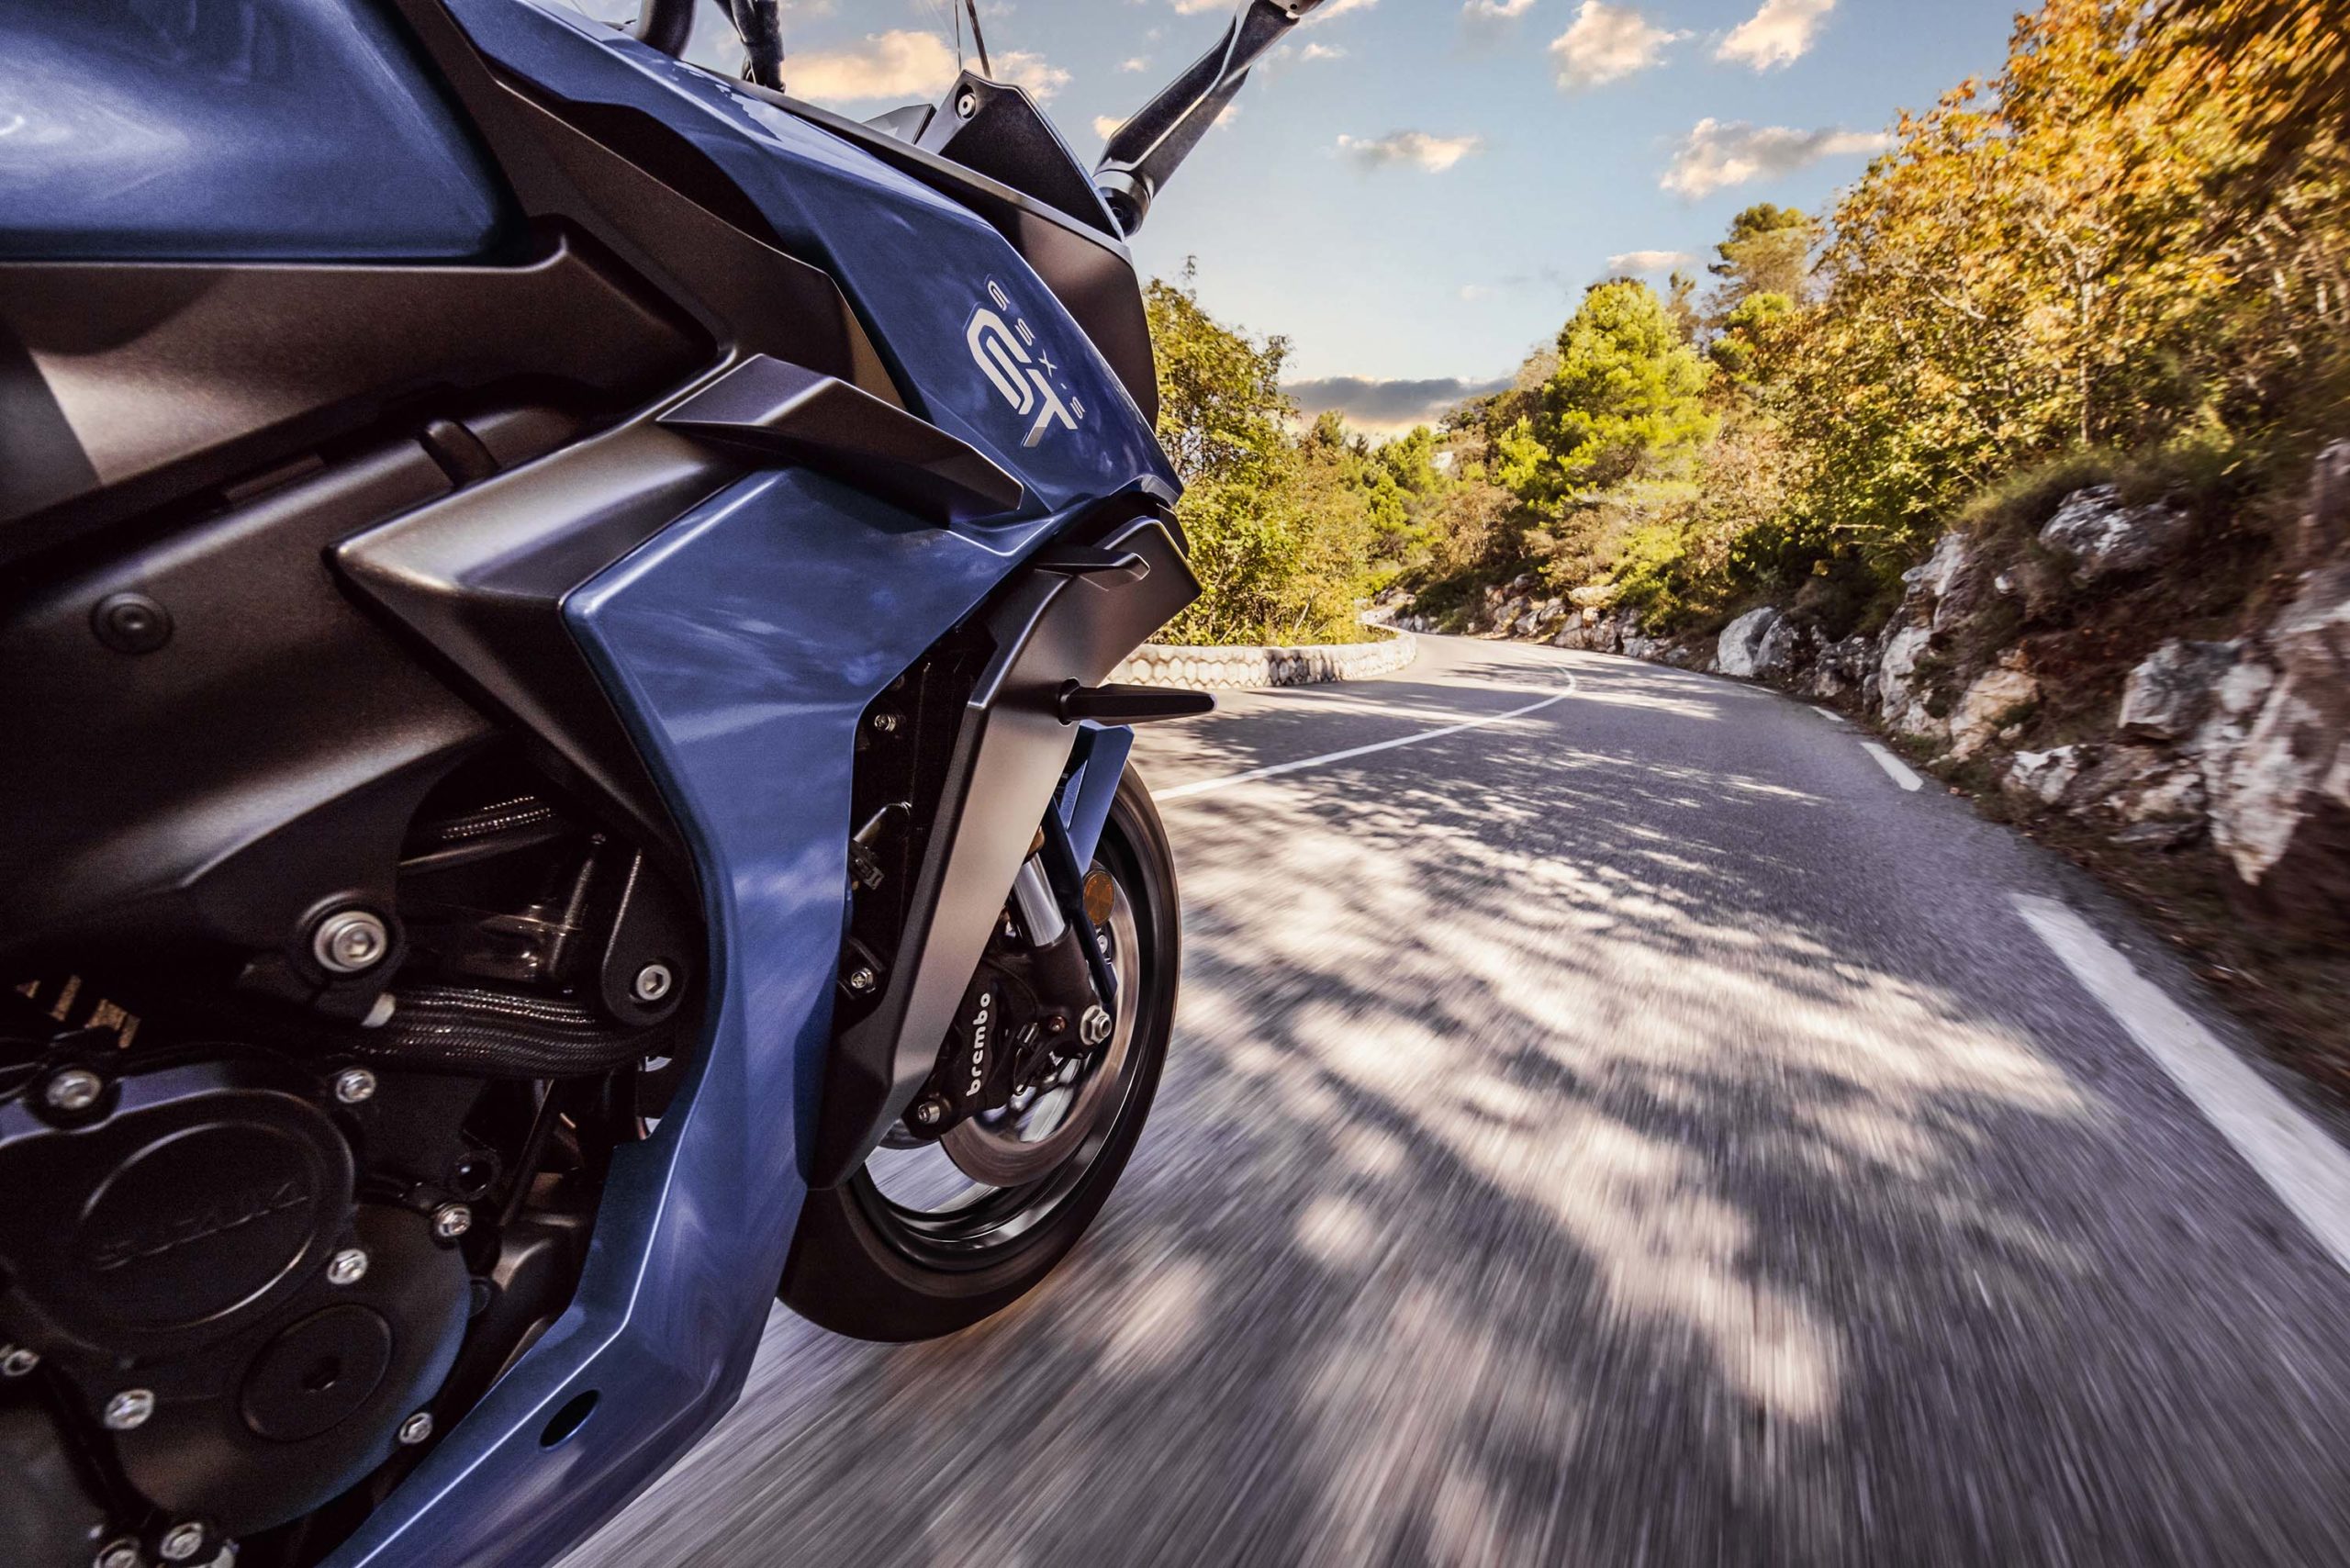 Suzuki Motorcycle Released the Best Feature of the GSX-S1000